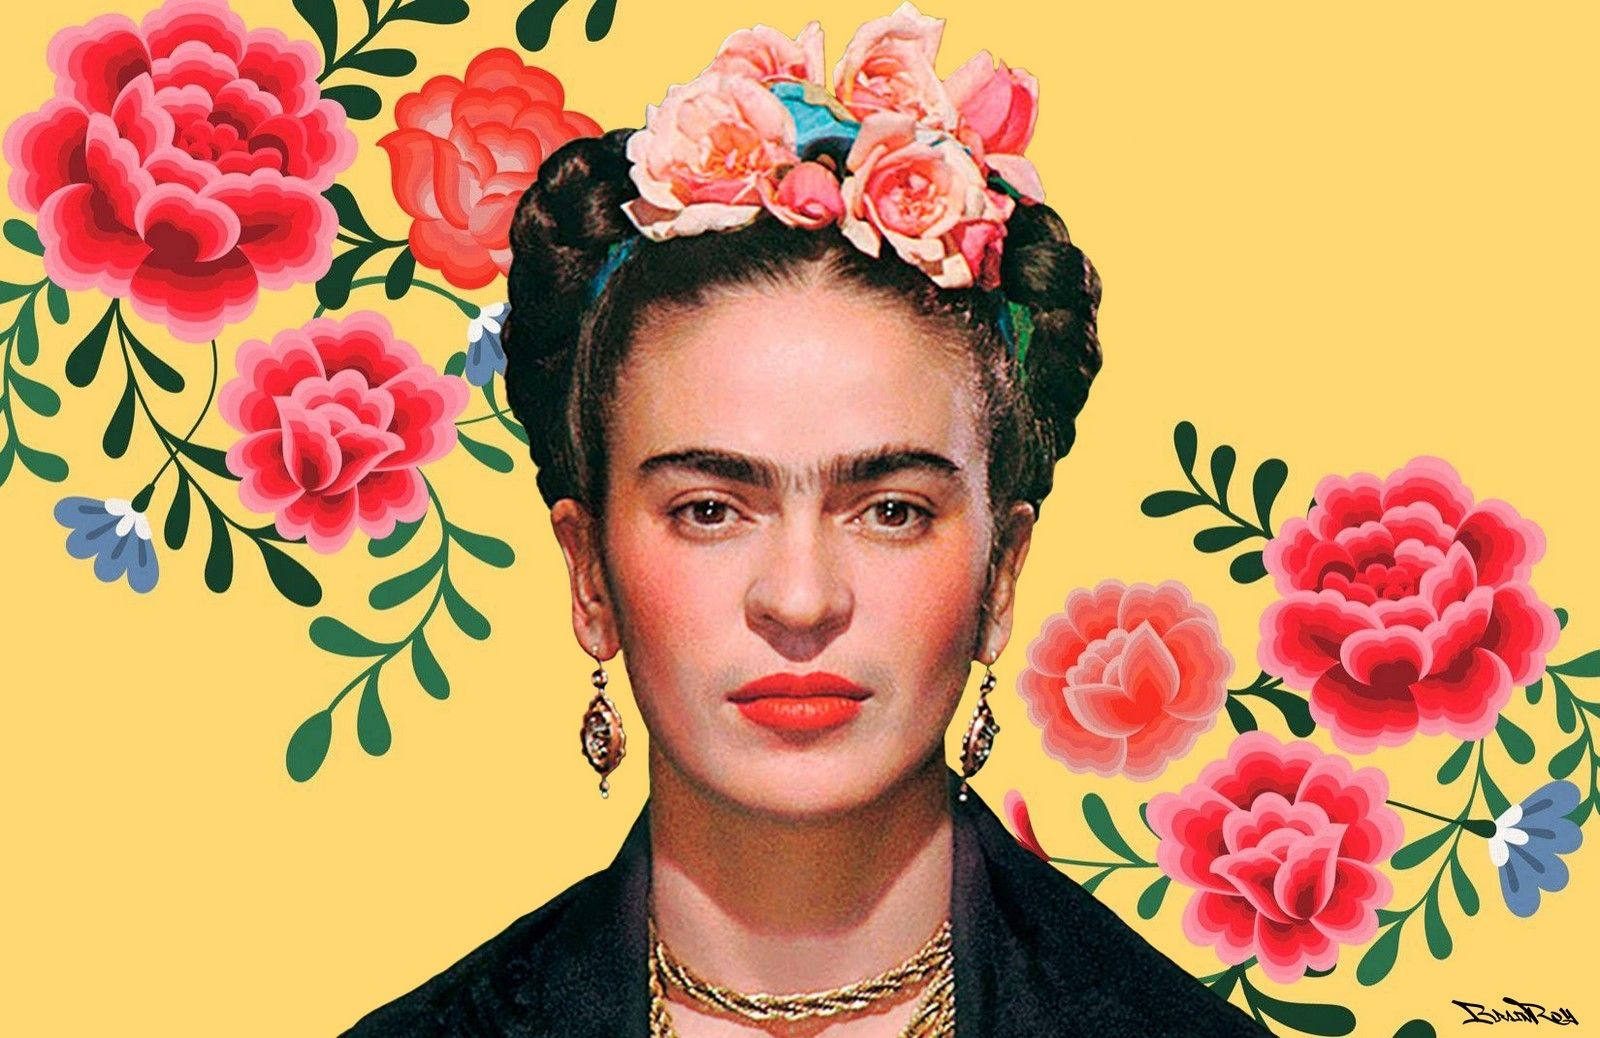 A painting of Frida Kahlo in front of a yellow background with red flowers. - Frida Kahlo